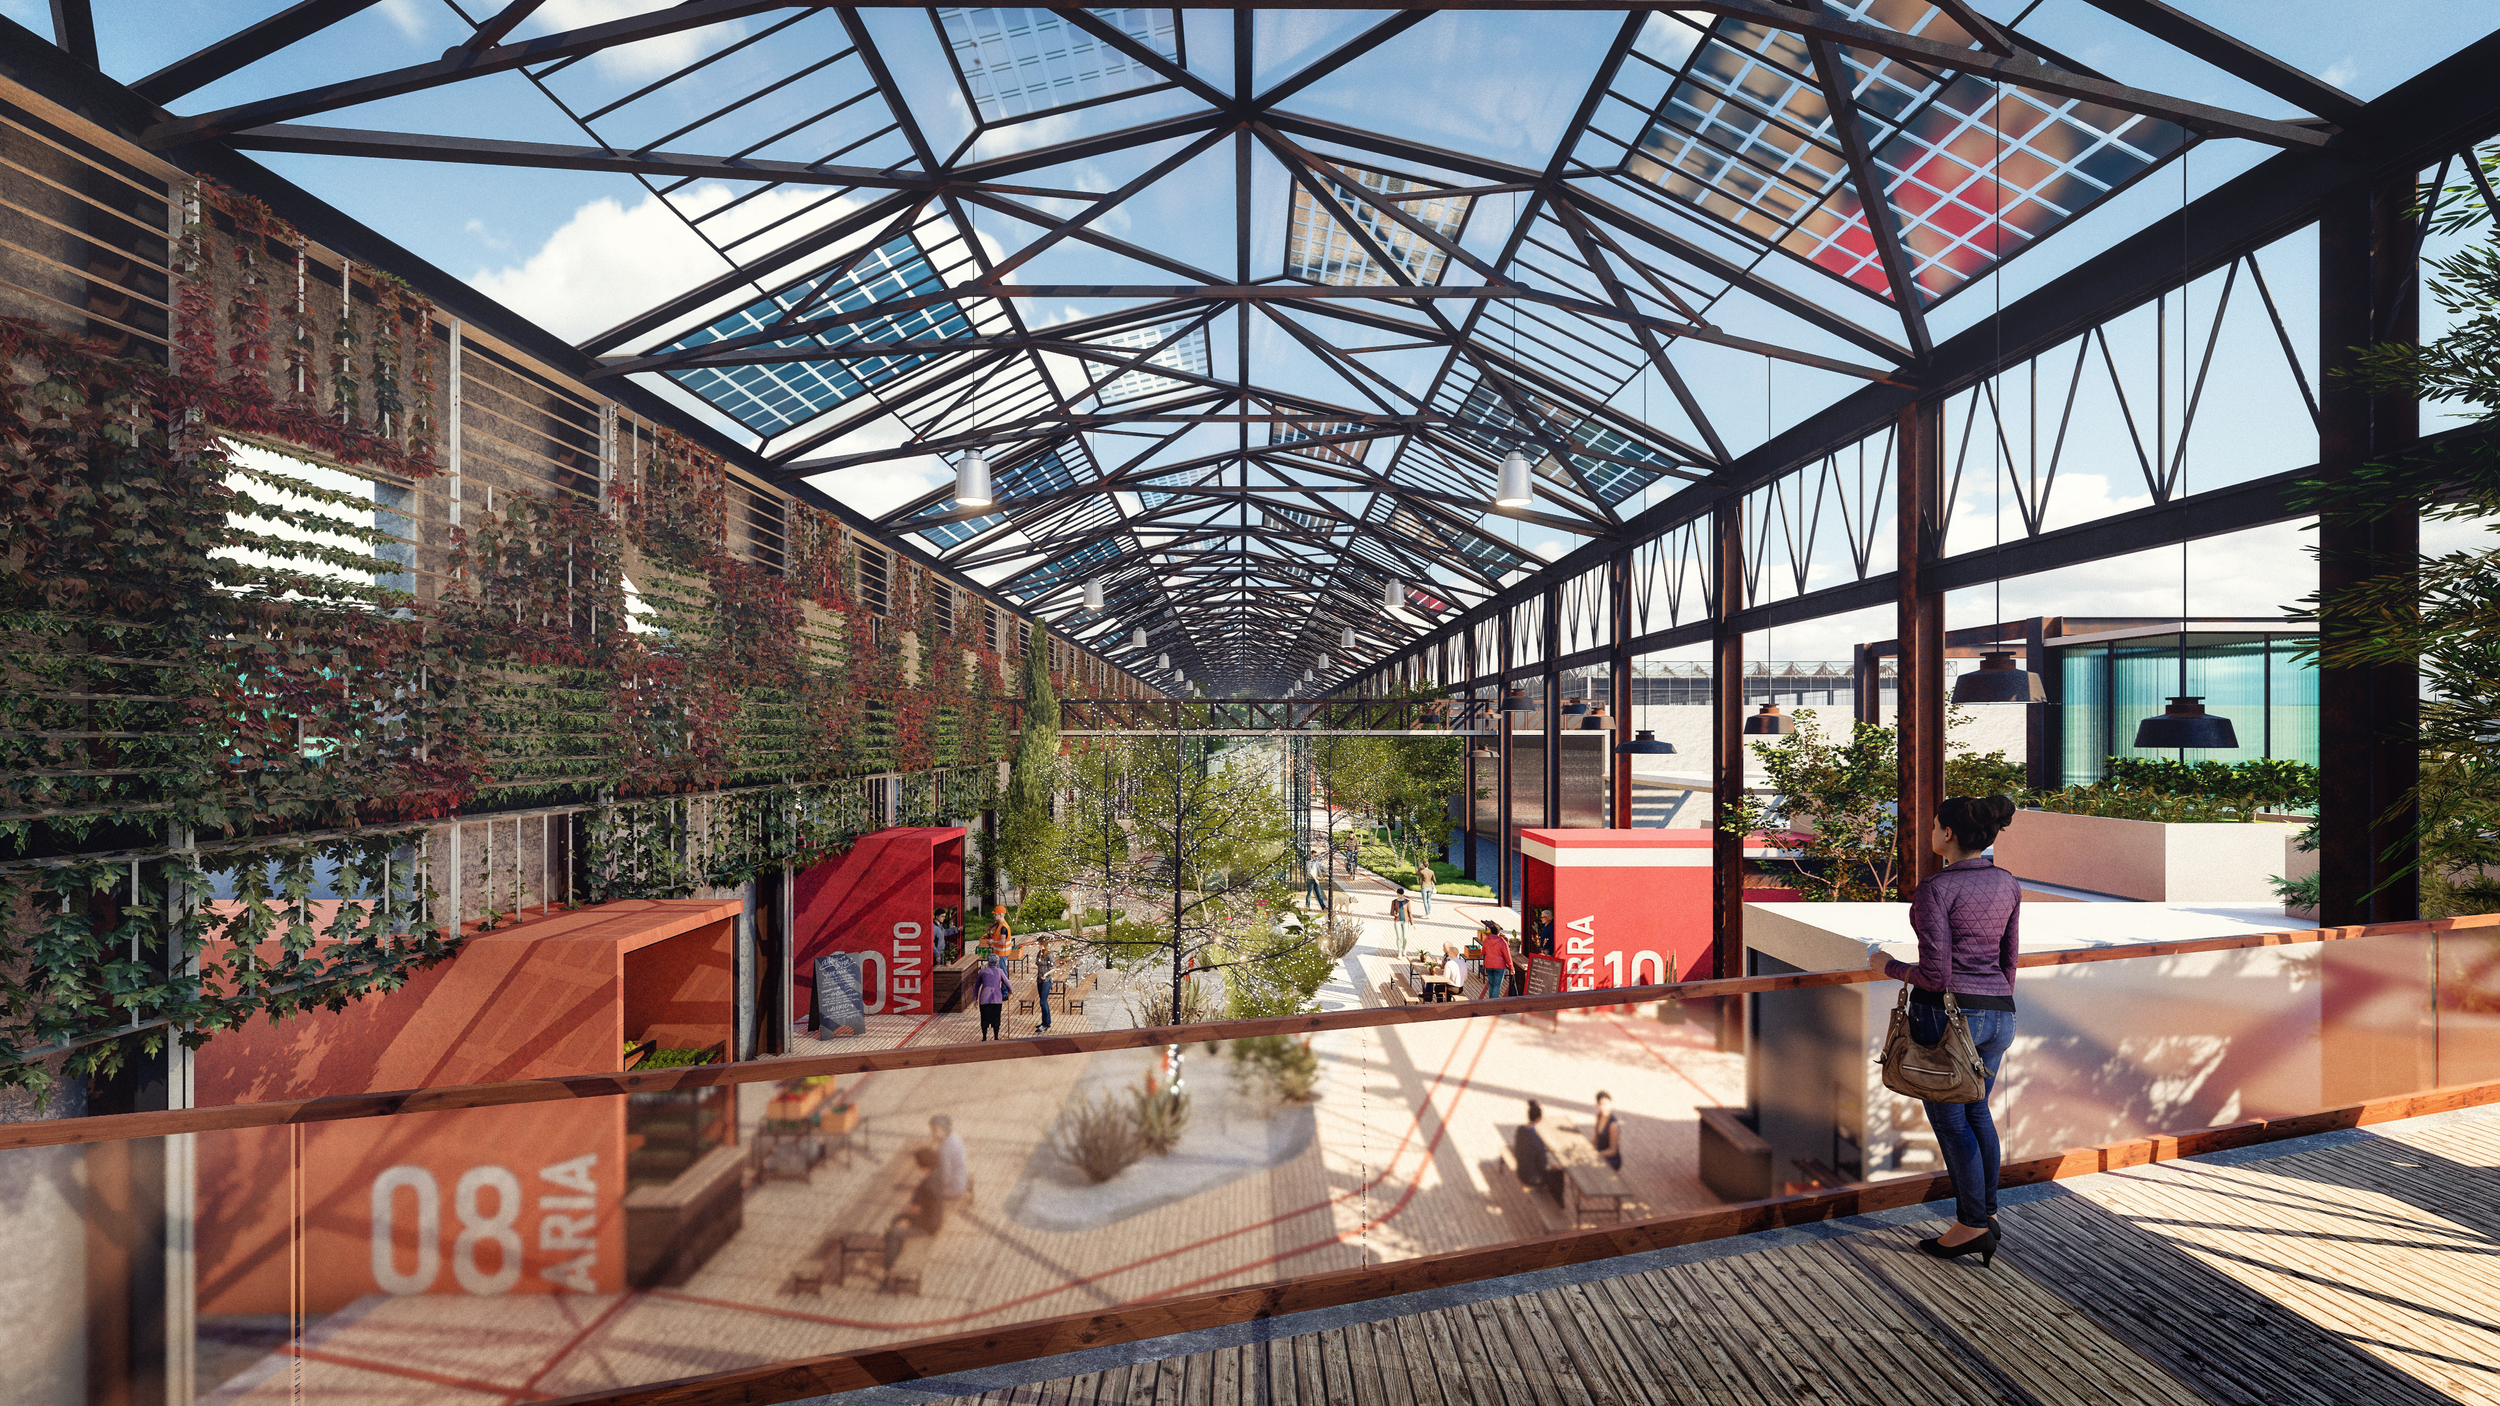 Rendering of the interiors of the site design